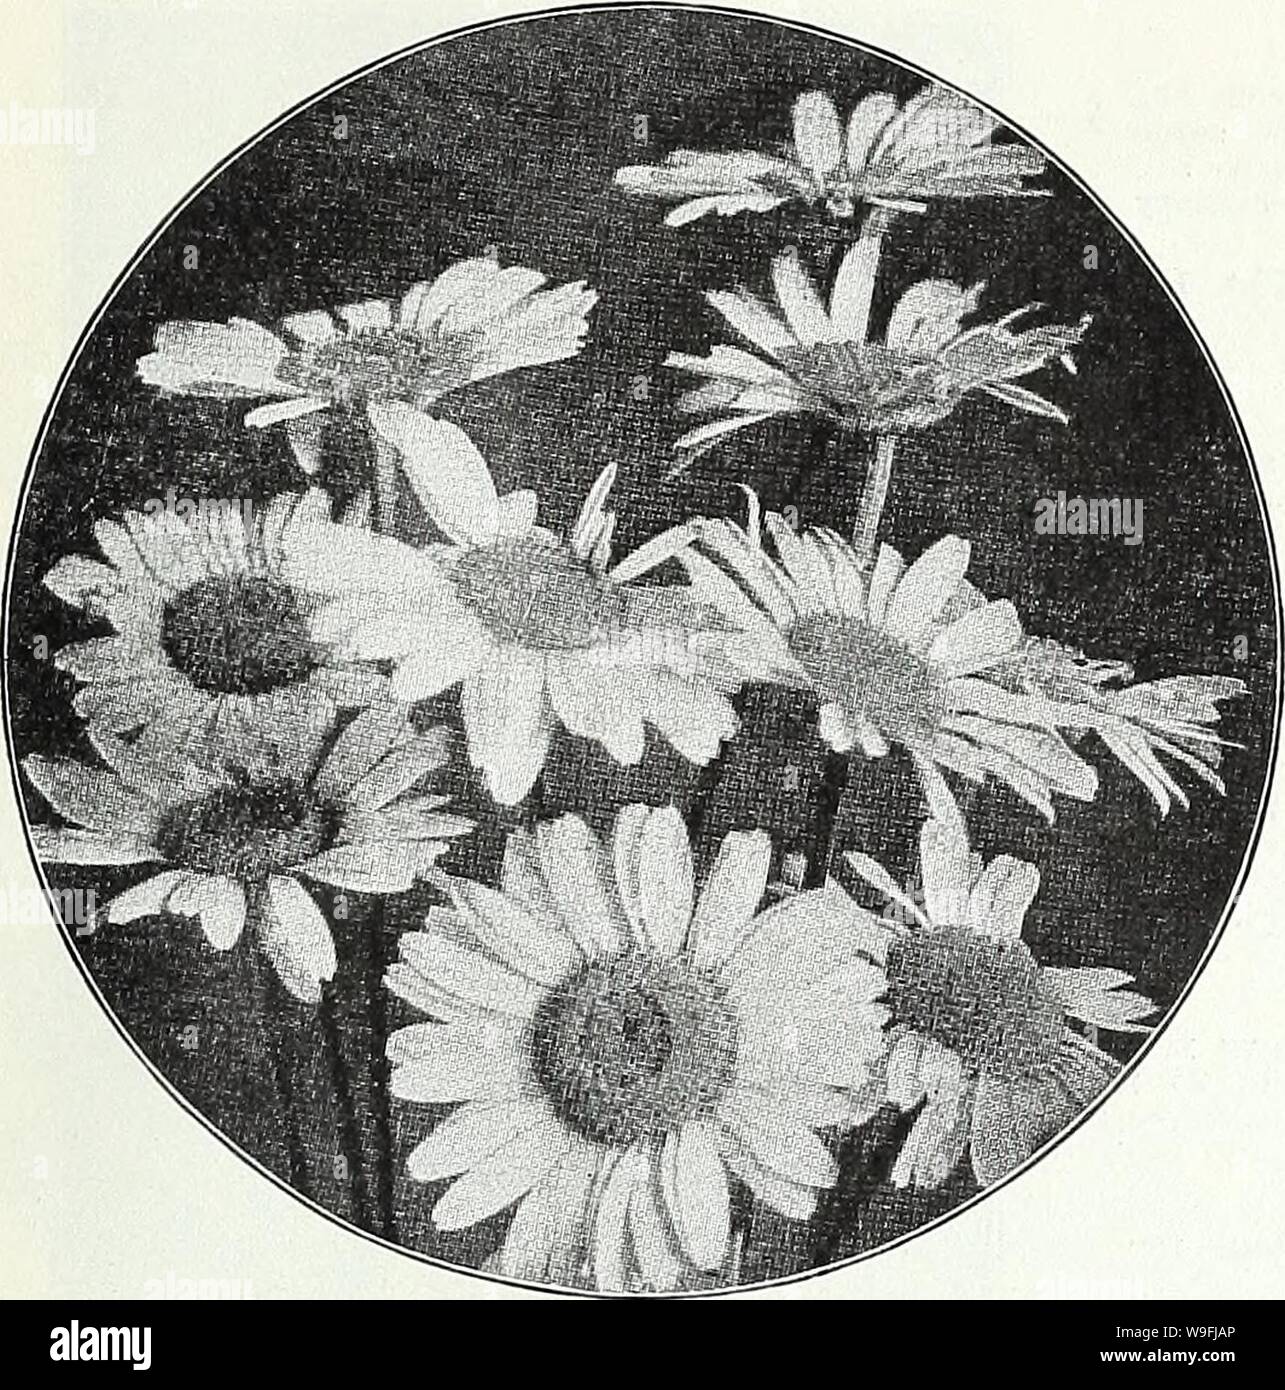 Archive image from page 46 of Currie's garden annual  spring,. Currie's garden annual : spring, 1935 60th year  curriesgardenann19curr 1 Year: 1935 ( CURRIE BROTHERS CO., MILWAUKEE, WIS Page 43    ARABIS (Rock Cress) ALPINA—A hardy perennial and one of the earliest and pretti- est spring flowers. The spreading tufts are covered with a sheet of pure white flowers as soon as the snow disappears. Unequalled for rockeries or edging ; withstands the drought, and is always neat. 6 inches. Plants, price, each, 25c; per doz., $2.50; seeds.  oz., 25c Pkt. 10c AURICULA (Primula Auricula) A well-known fa Stock Photo